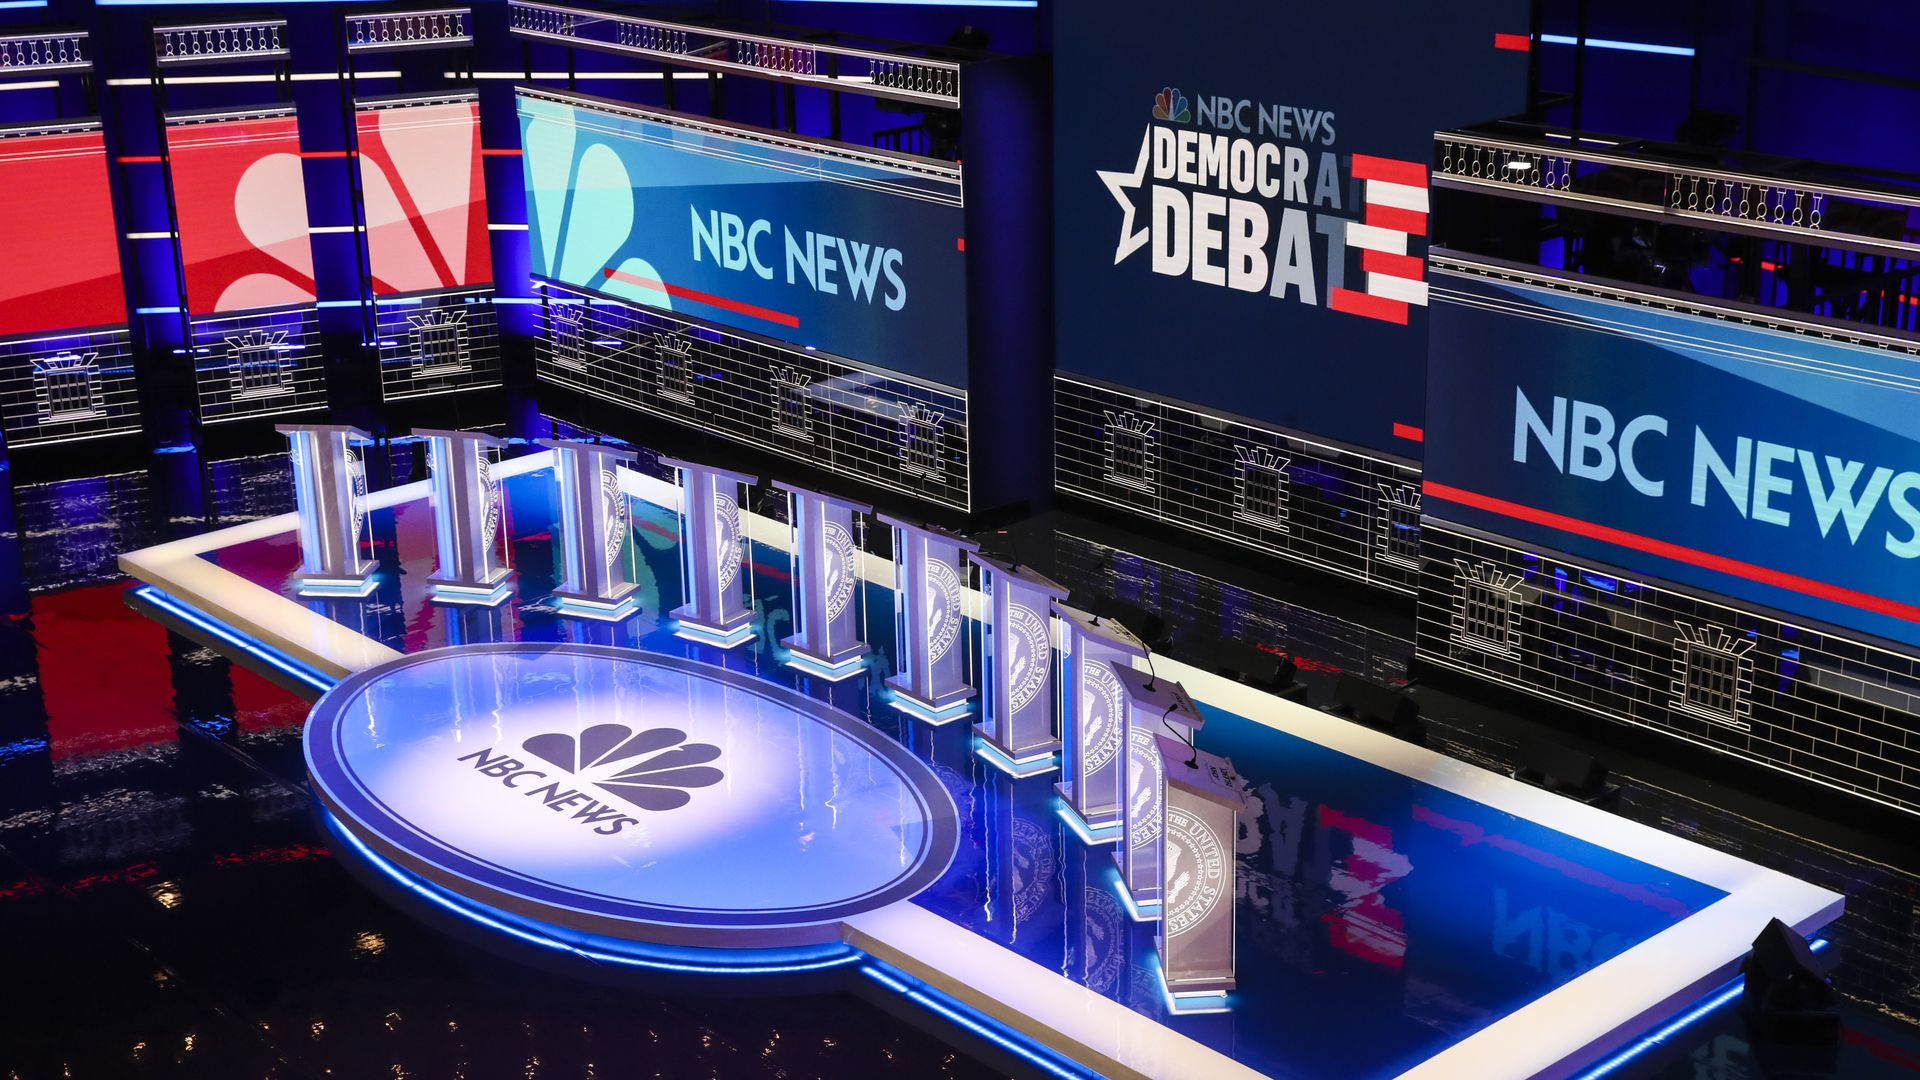 October dates set for 4th round of Democratic primary debates - Axios1920 x 1080